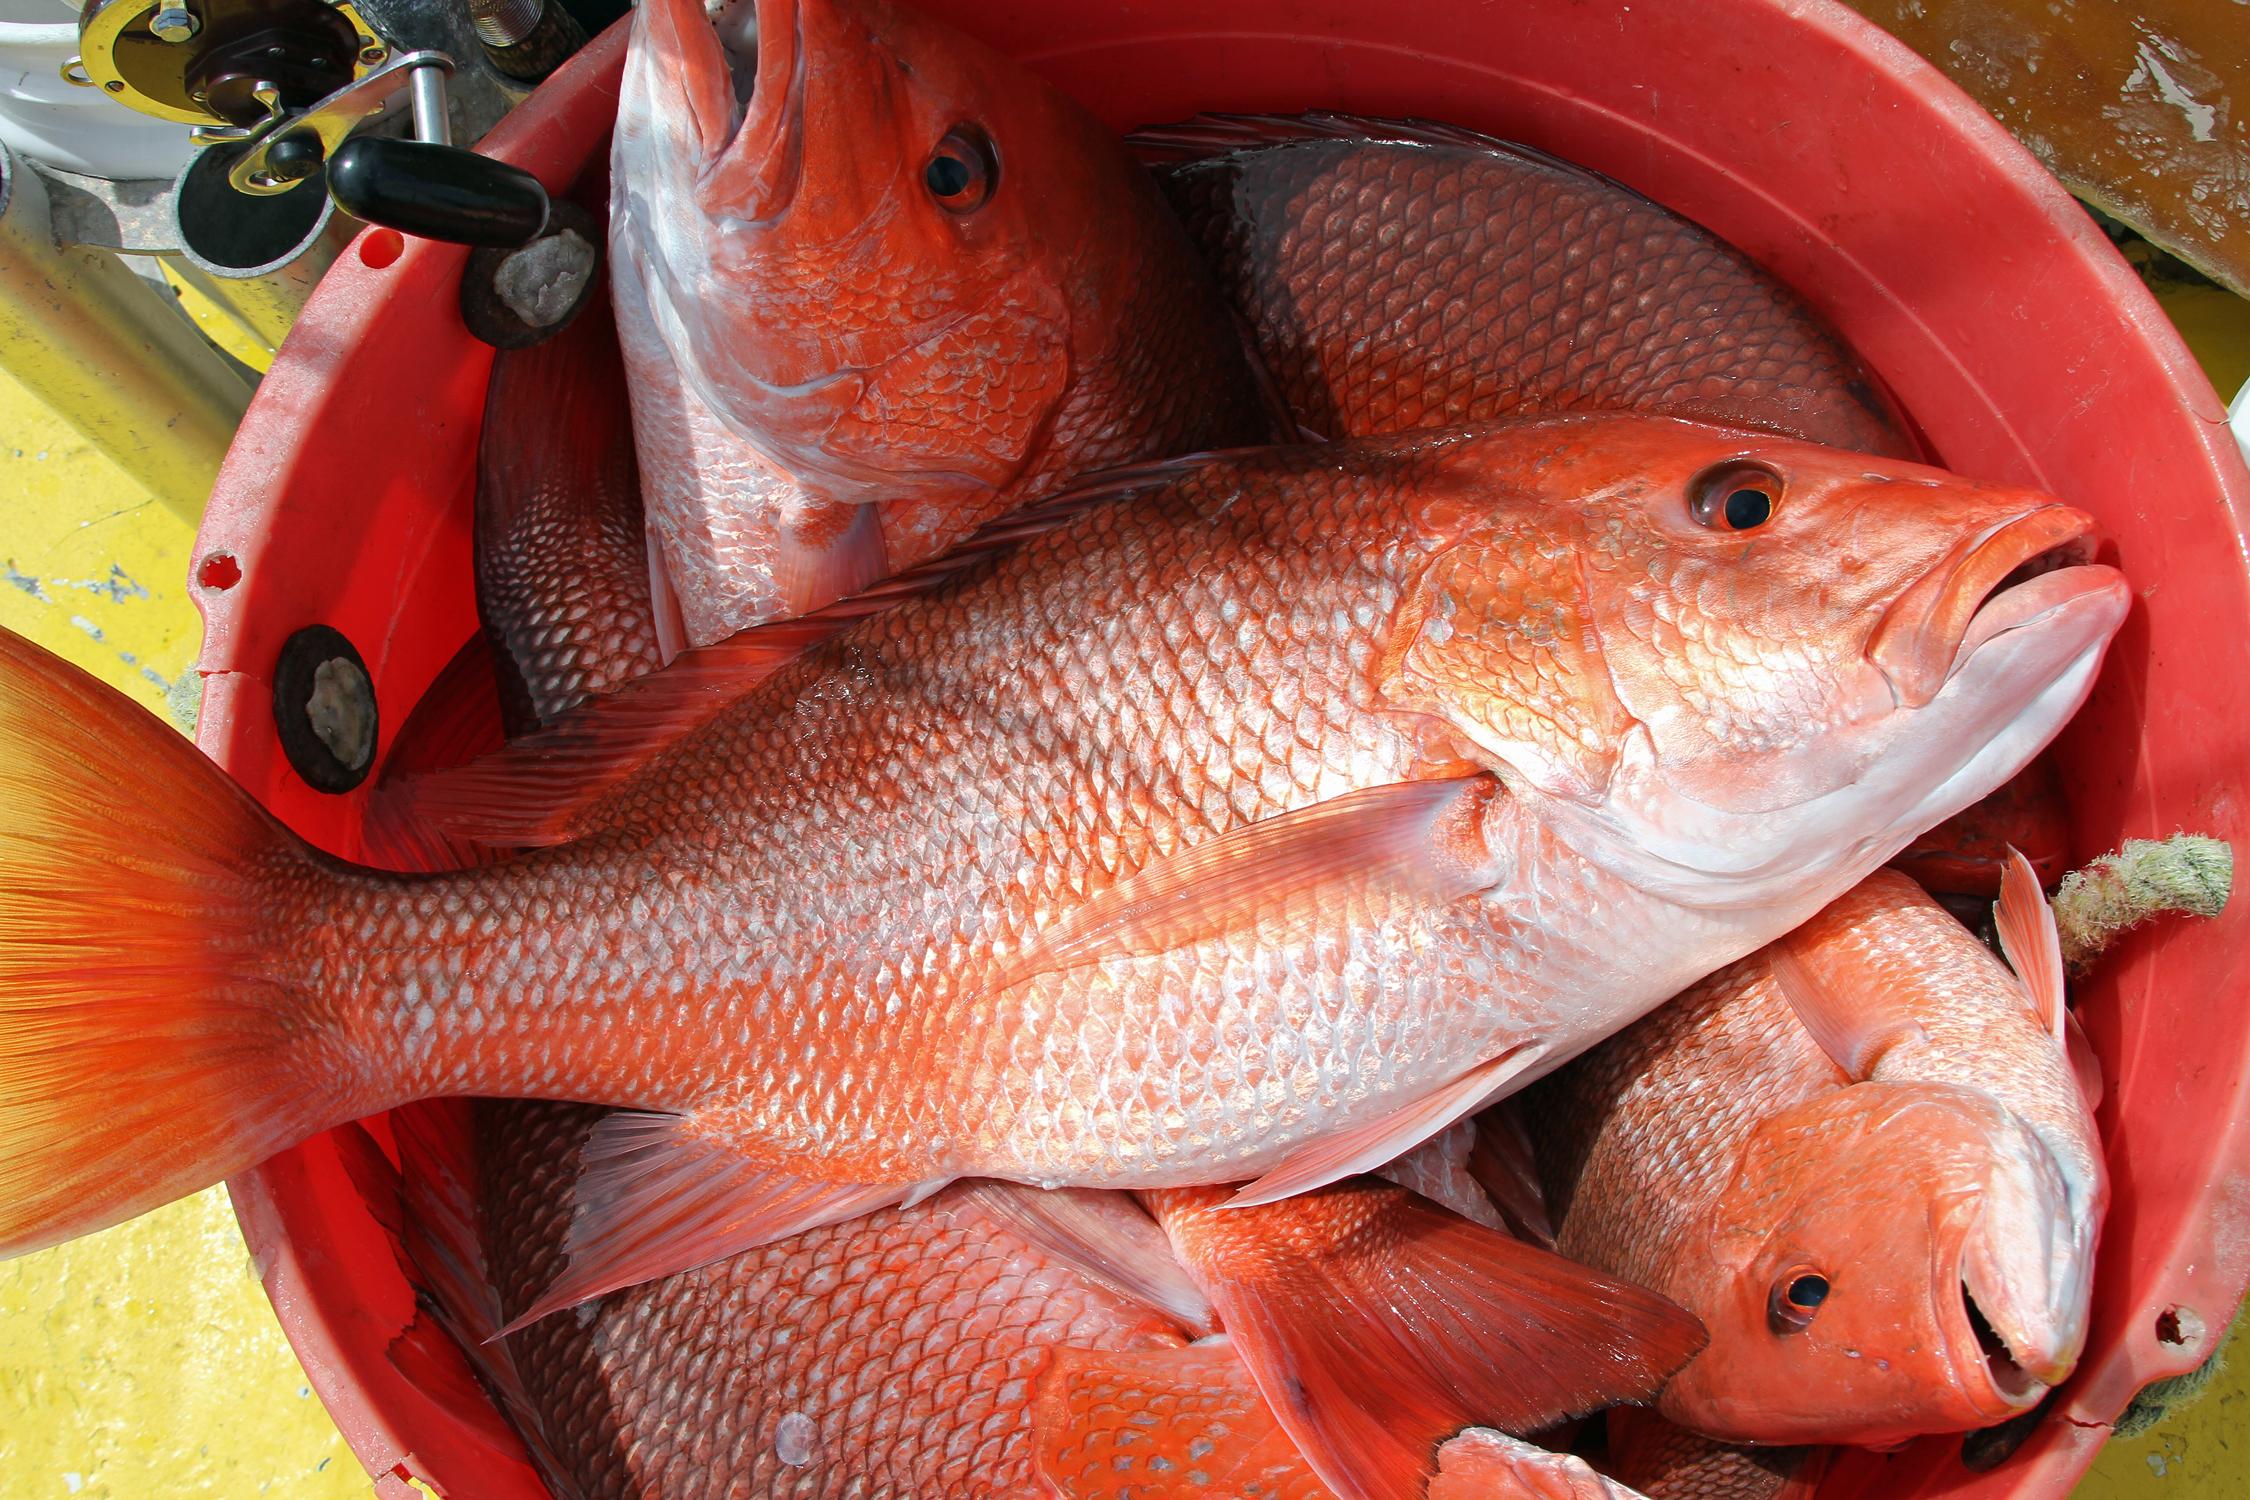 Alabama Adds ThreeDay Red Snapper Season for Private Anglers in